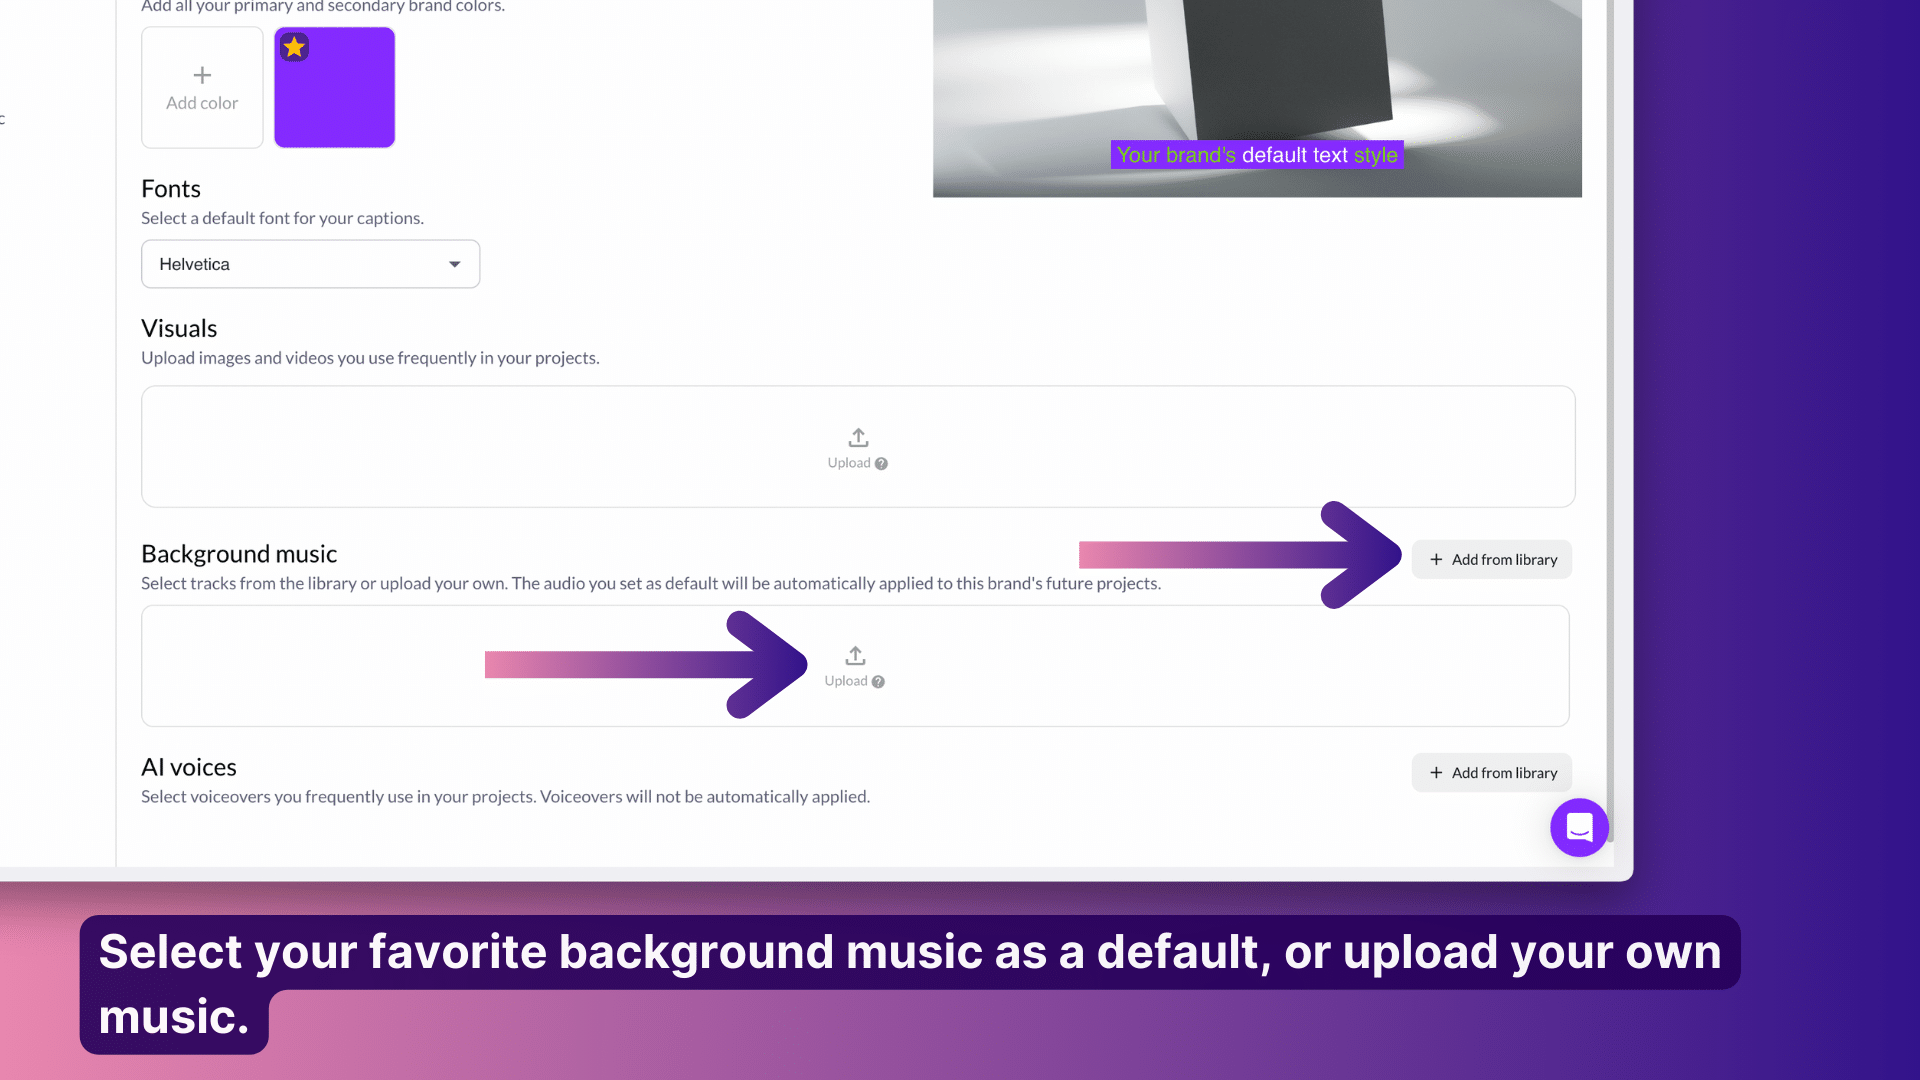 Select your favorite background music as a default, or upload your own music.